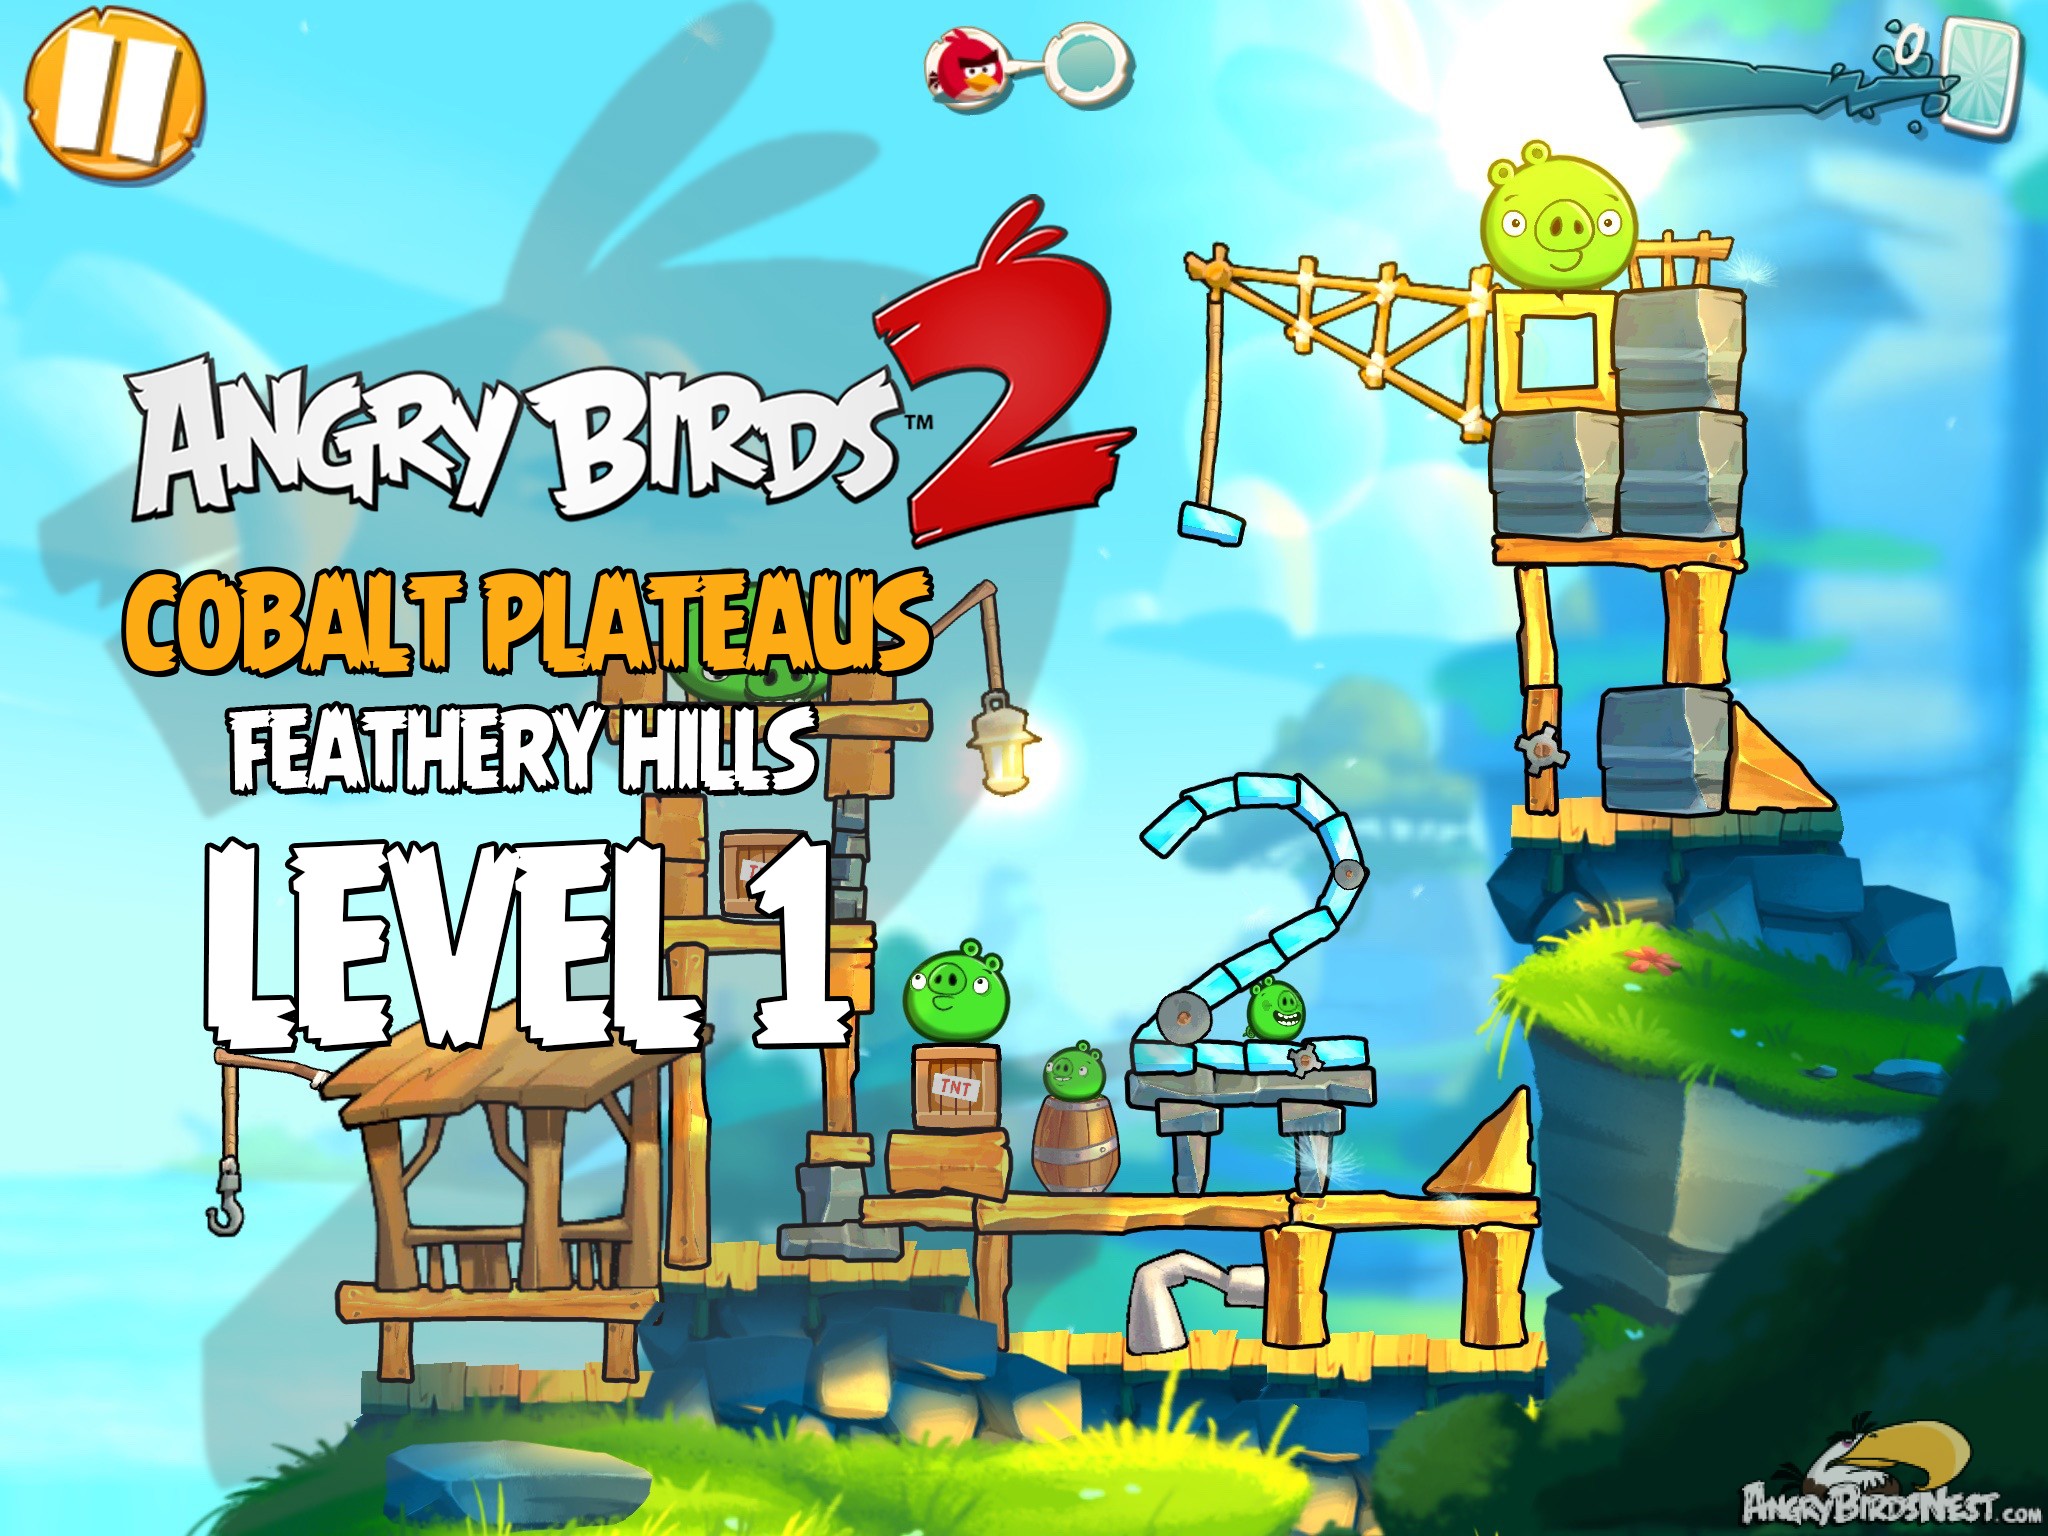 Angry Birds 2 Cobalt Plateaus Feathery Hills Level 1